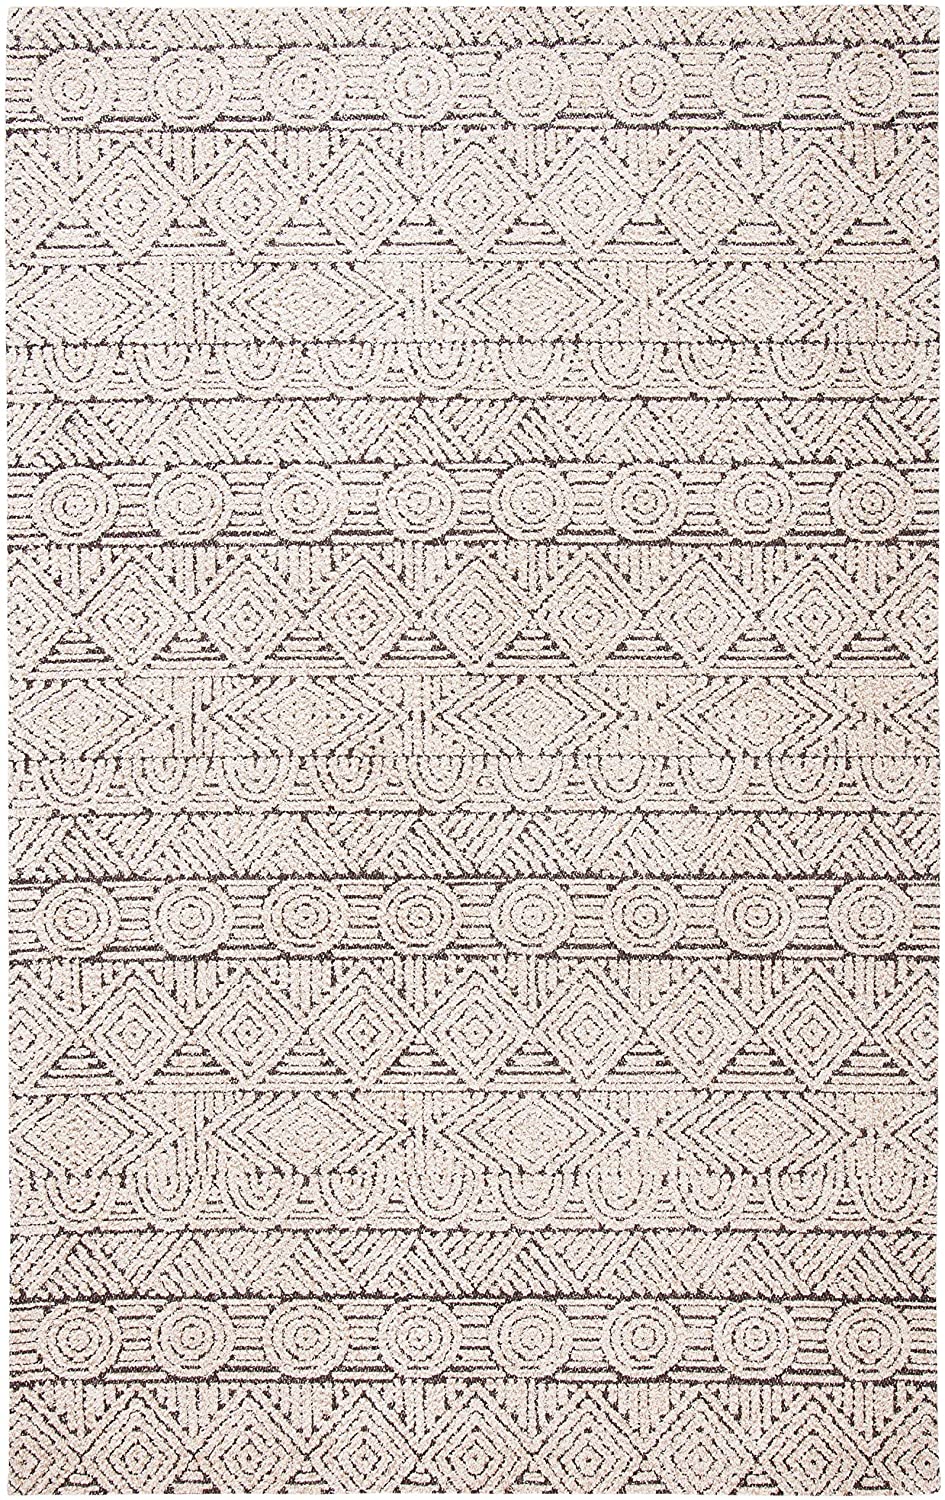 Safavieh Classic Vintage Clv901A Natural/Ivory Area Rug